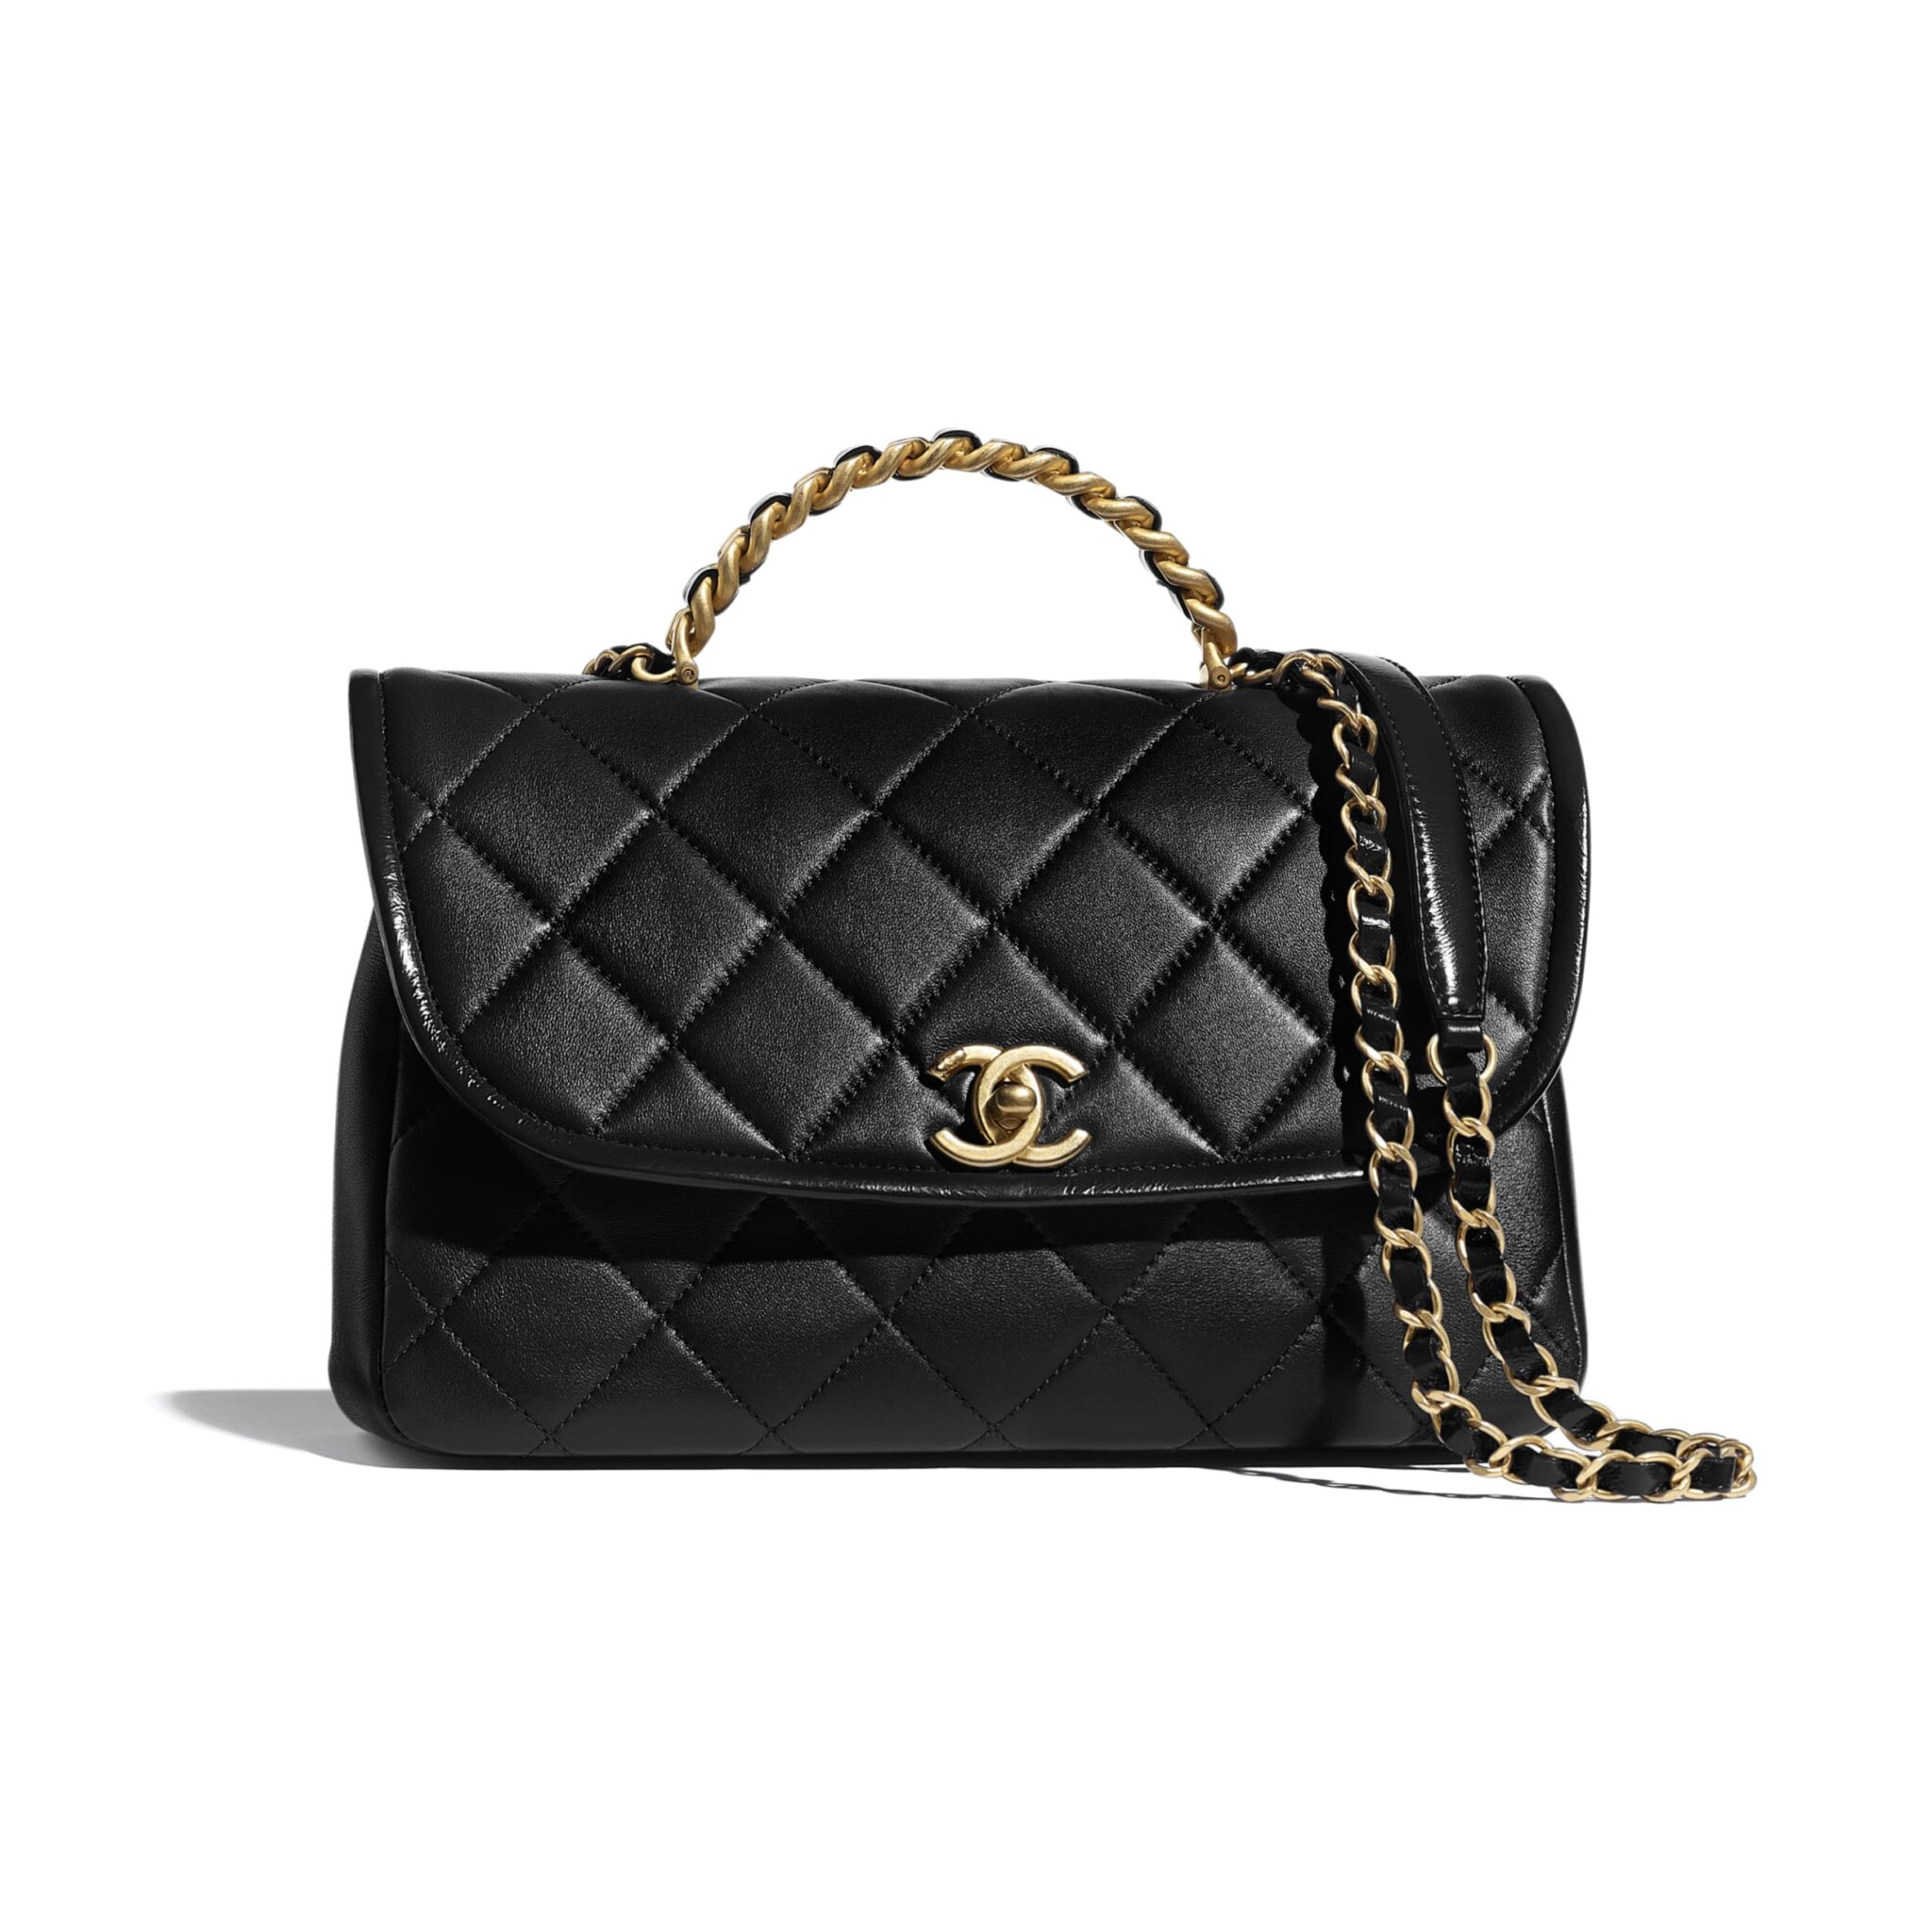 Chanel Black Shiny Quilted Calfskin Chanel 31 Large Shopping Bag